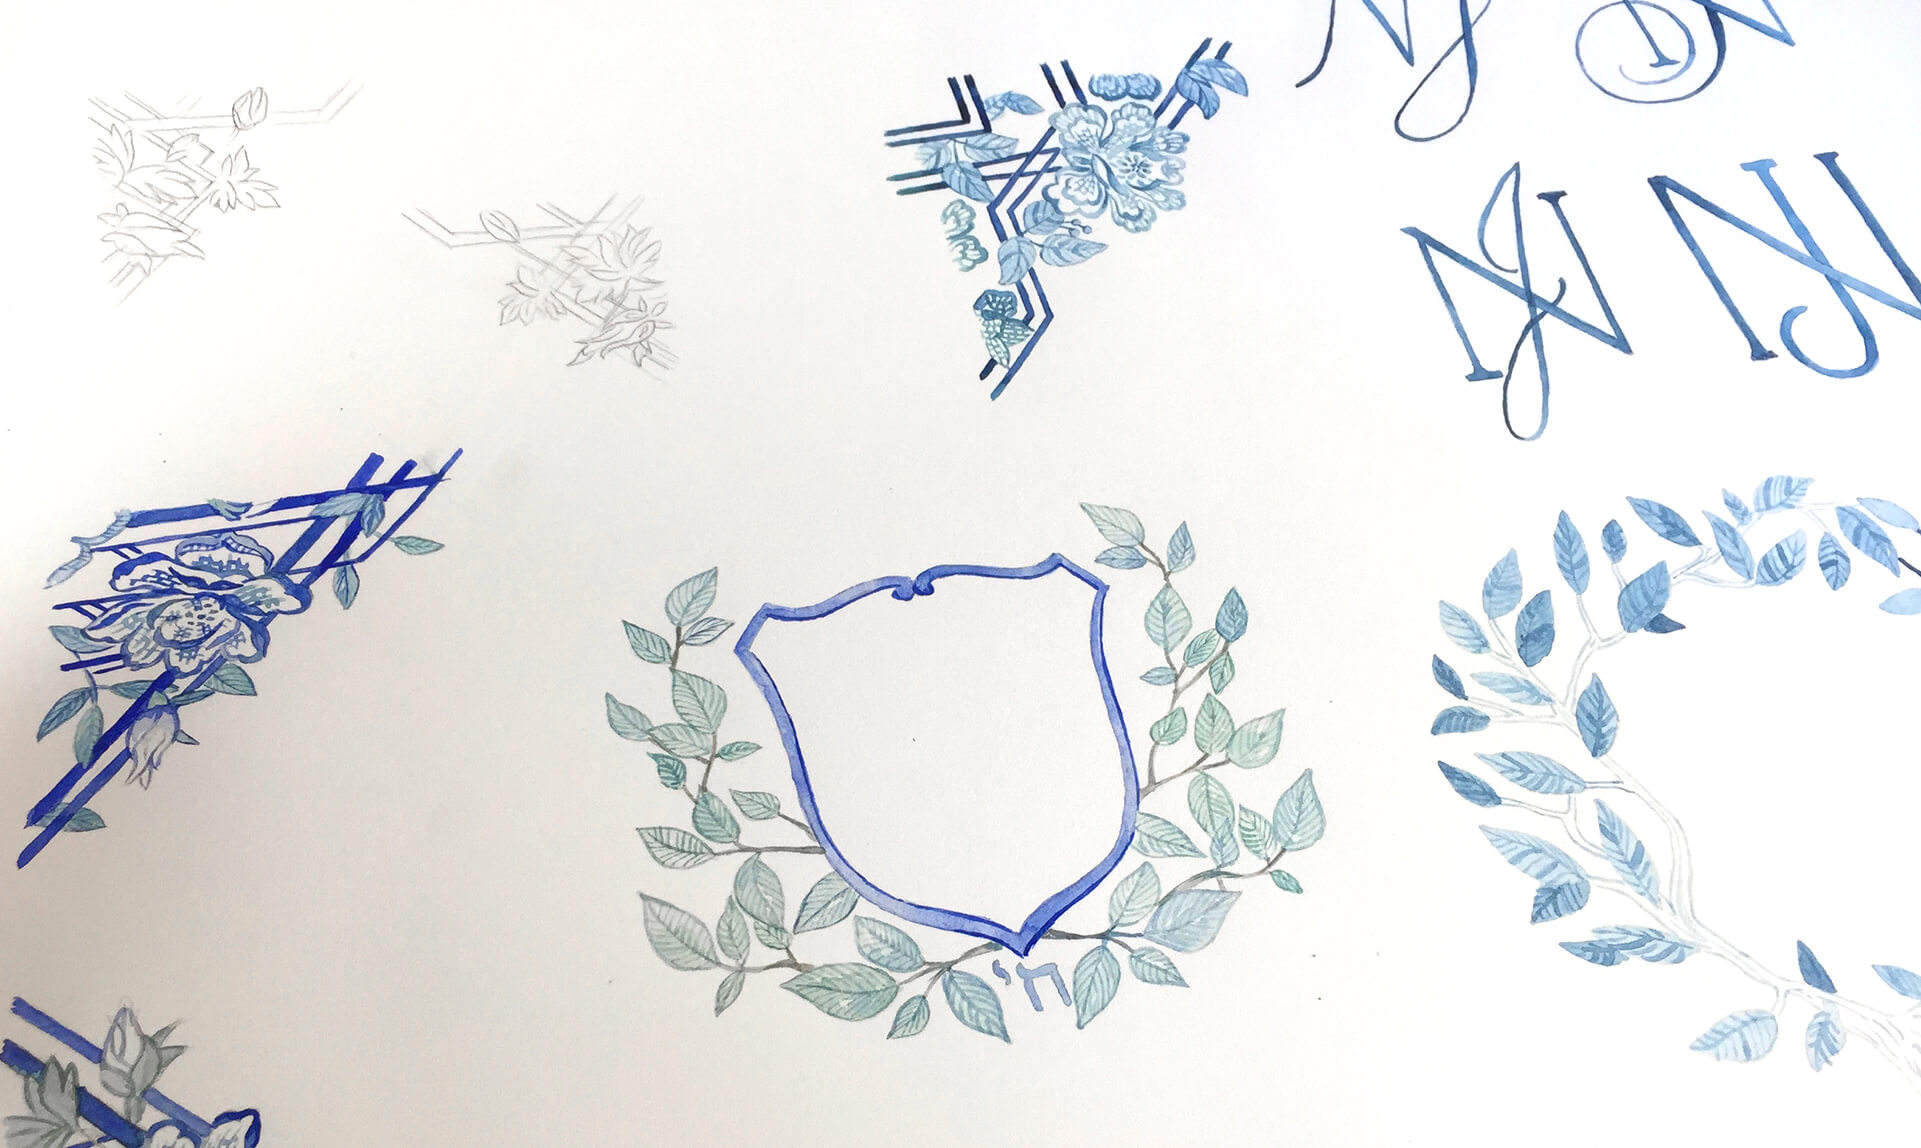 Watercolor process for crest and design elements